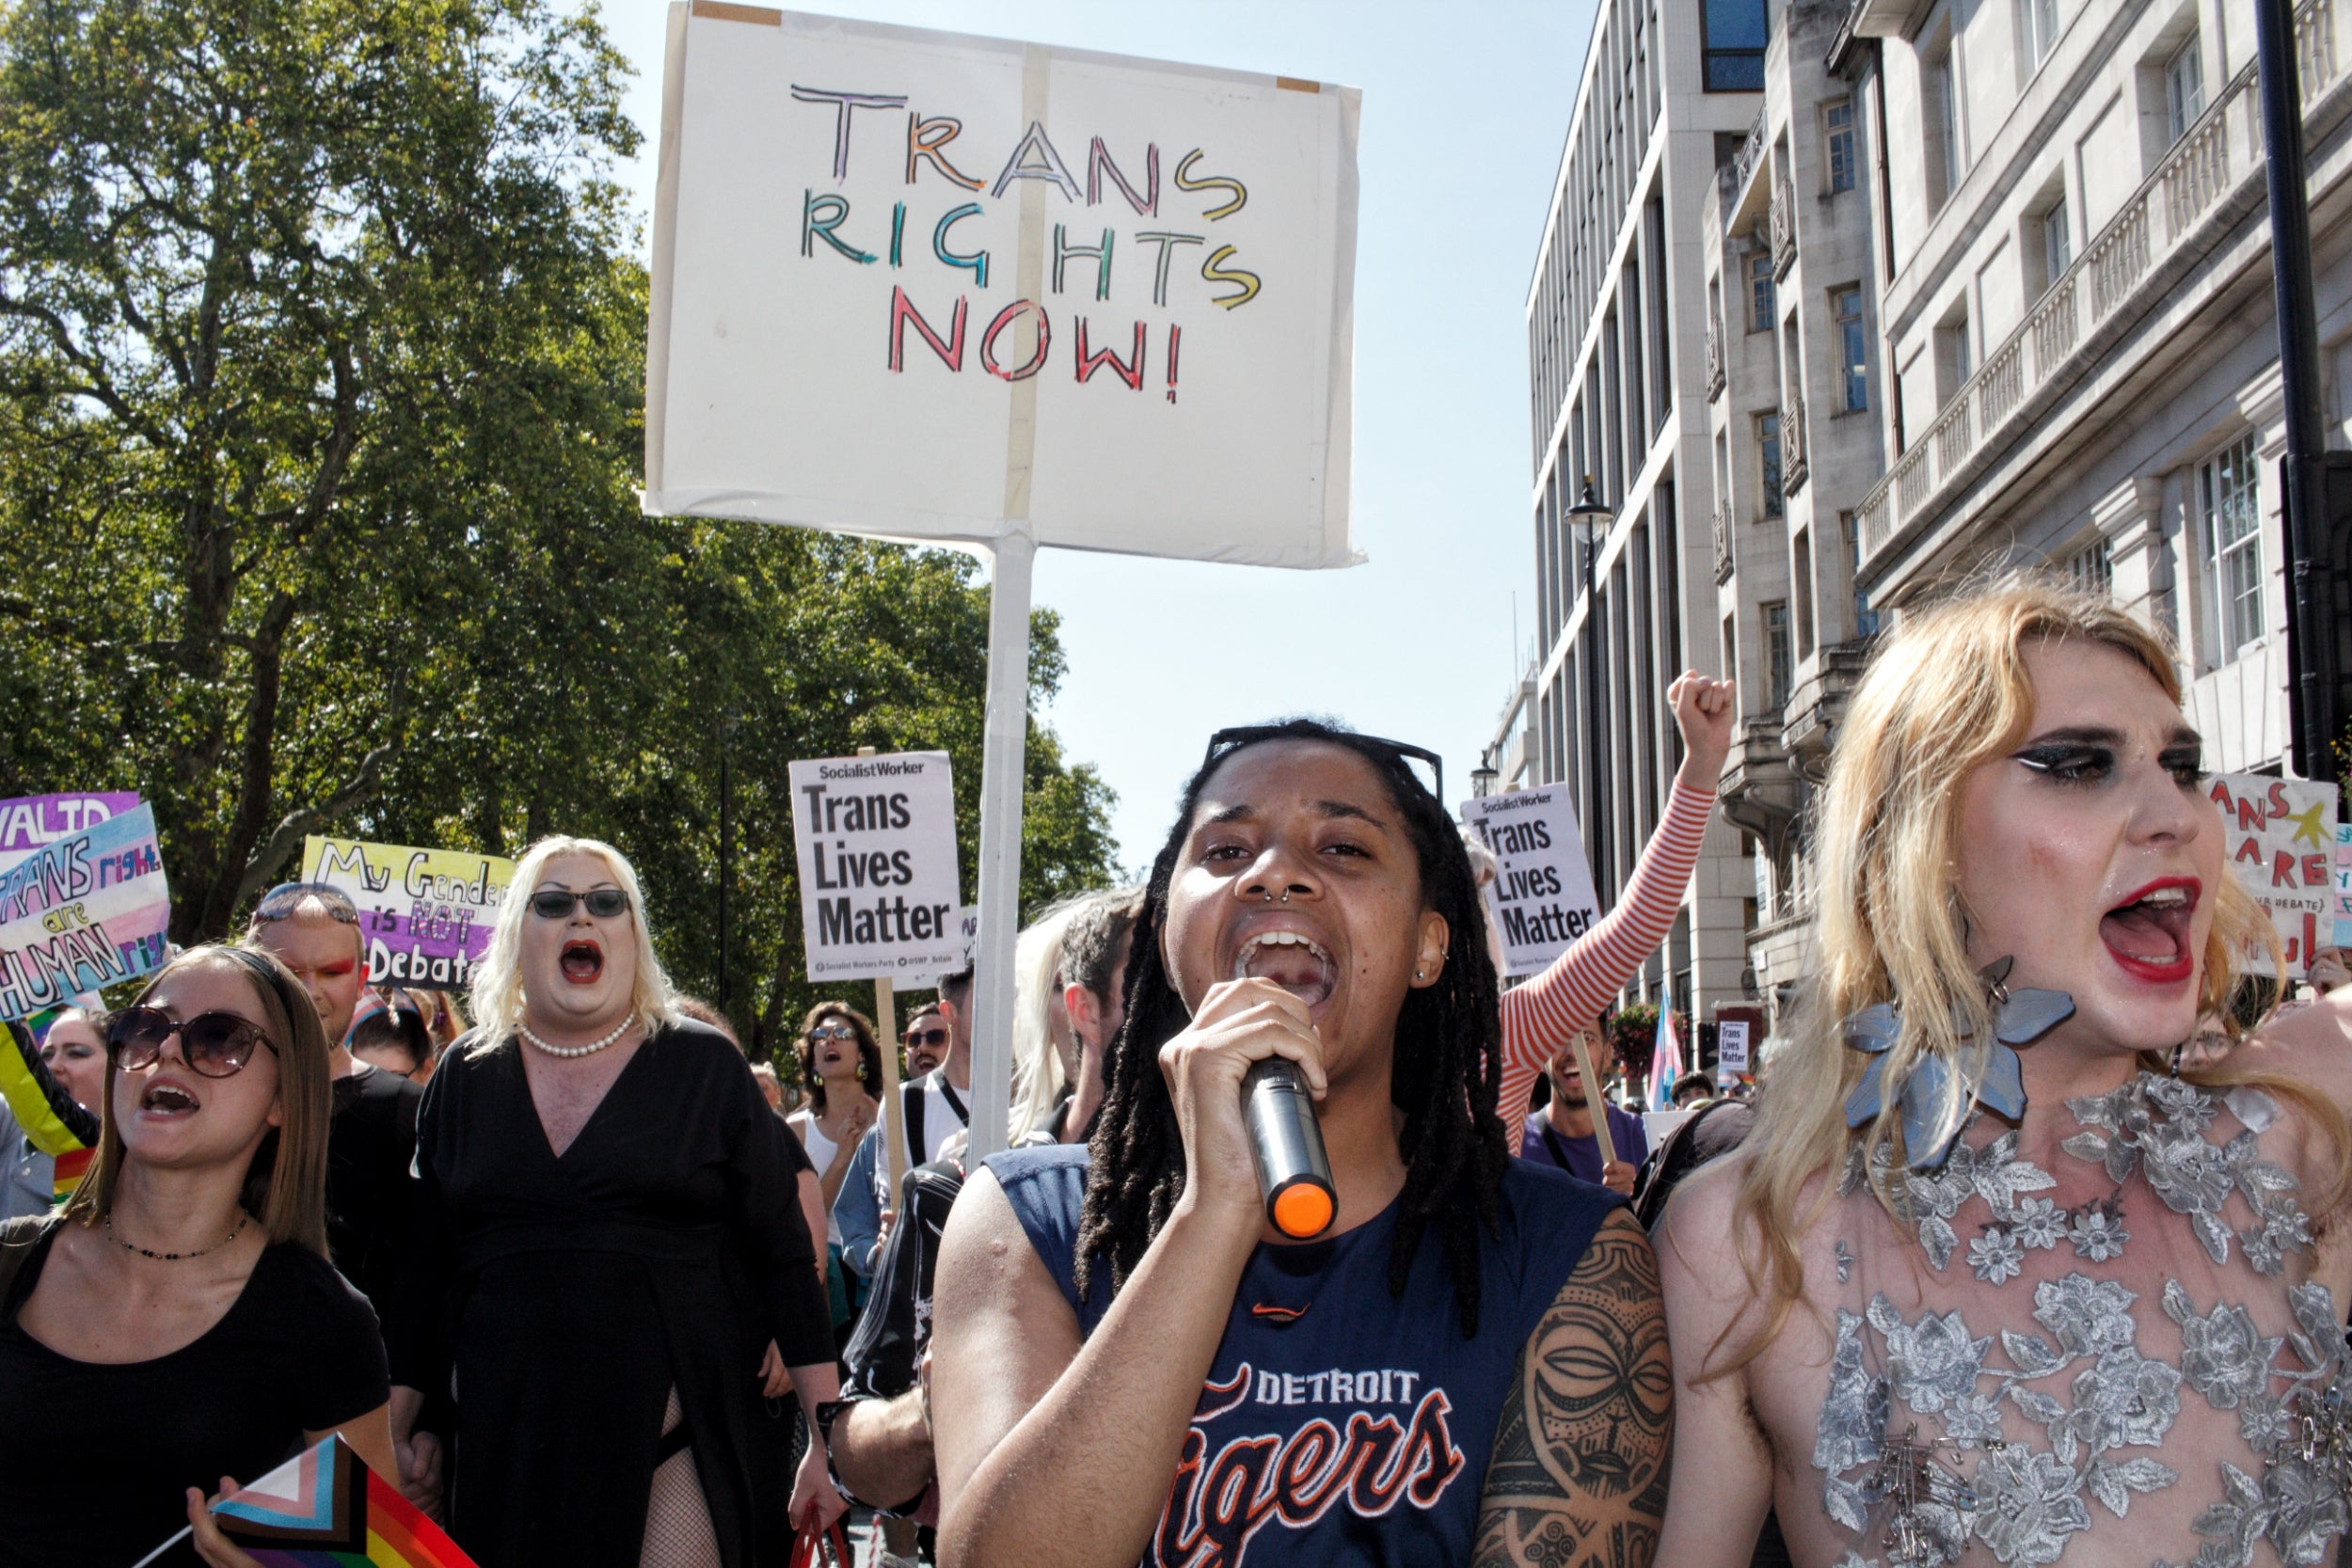 Attendees at London's first trans pride event in September 2019